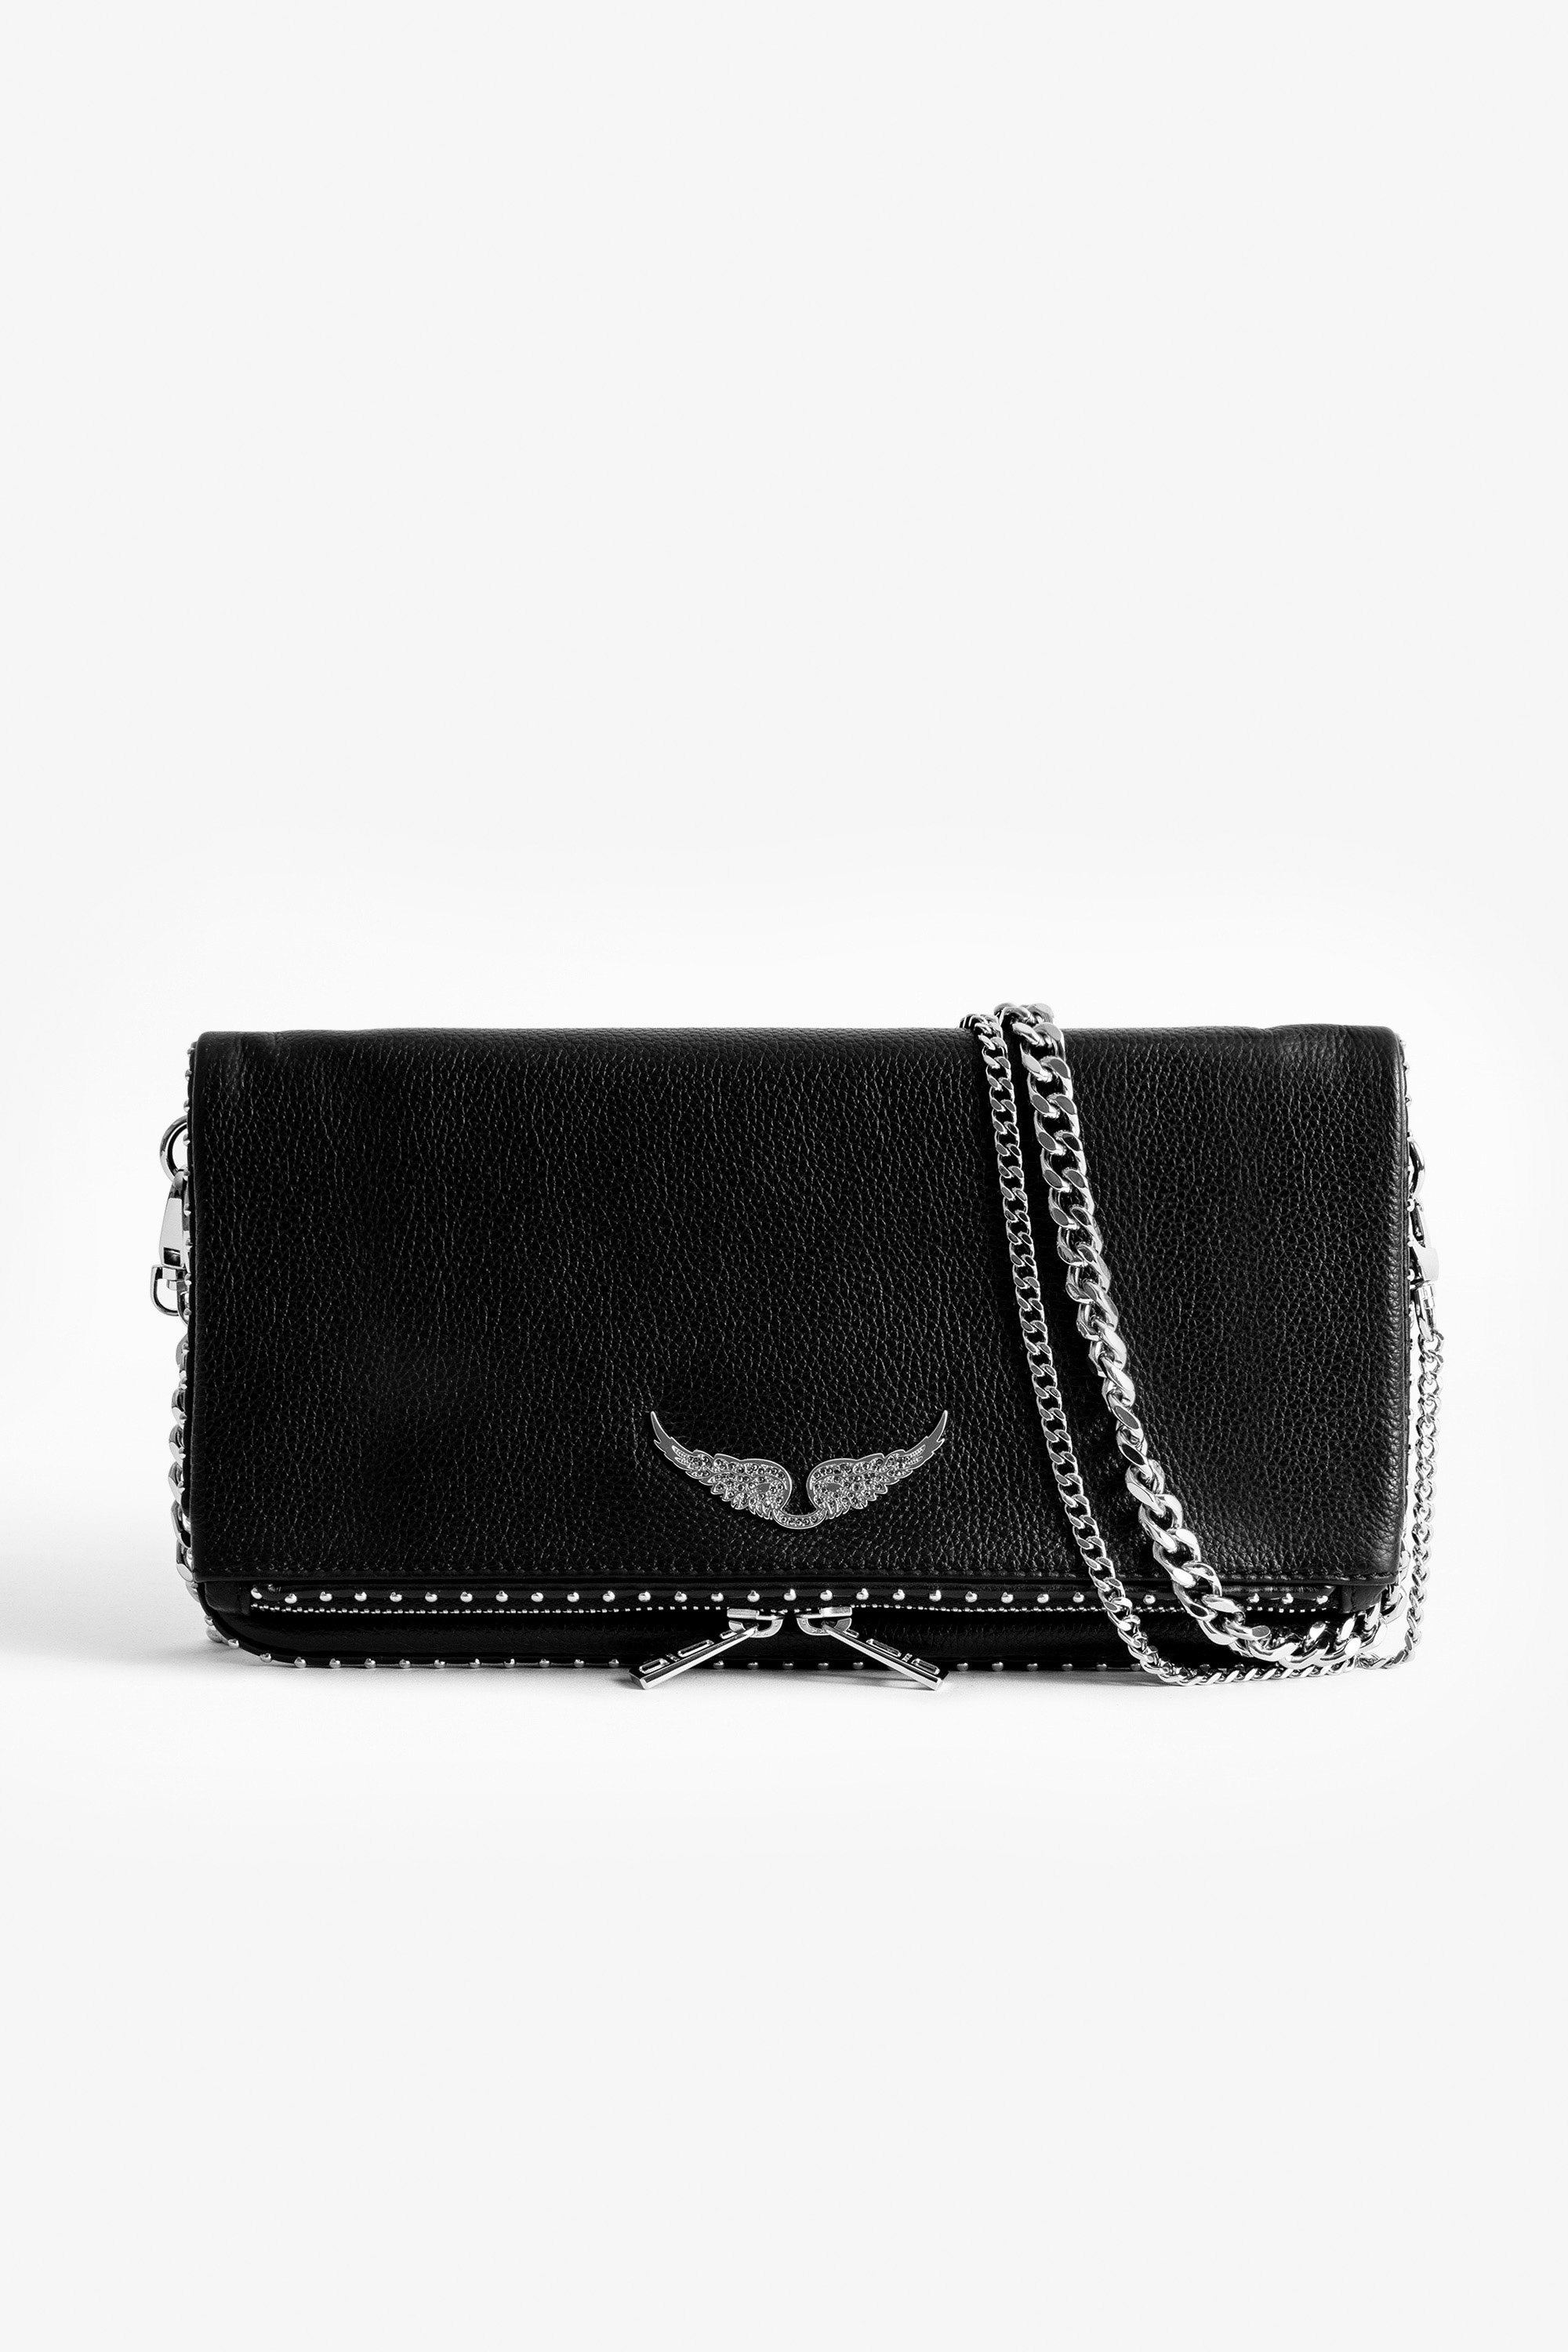 Rock Studs クラッチバッグ Women's black clutch in leather, embellished with studs.